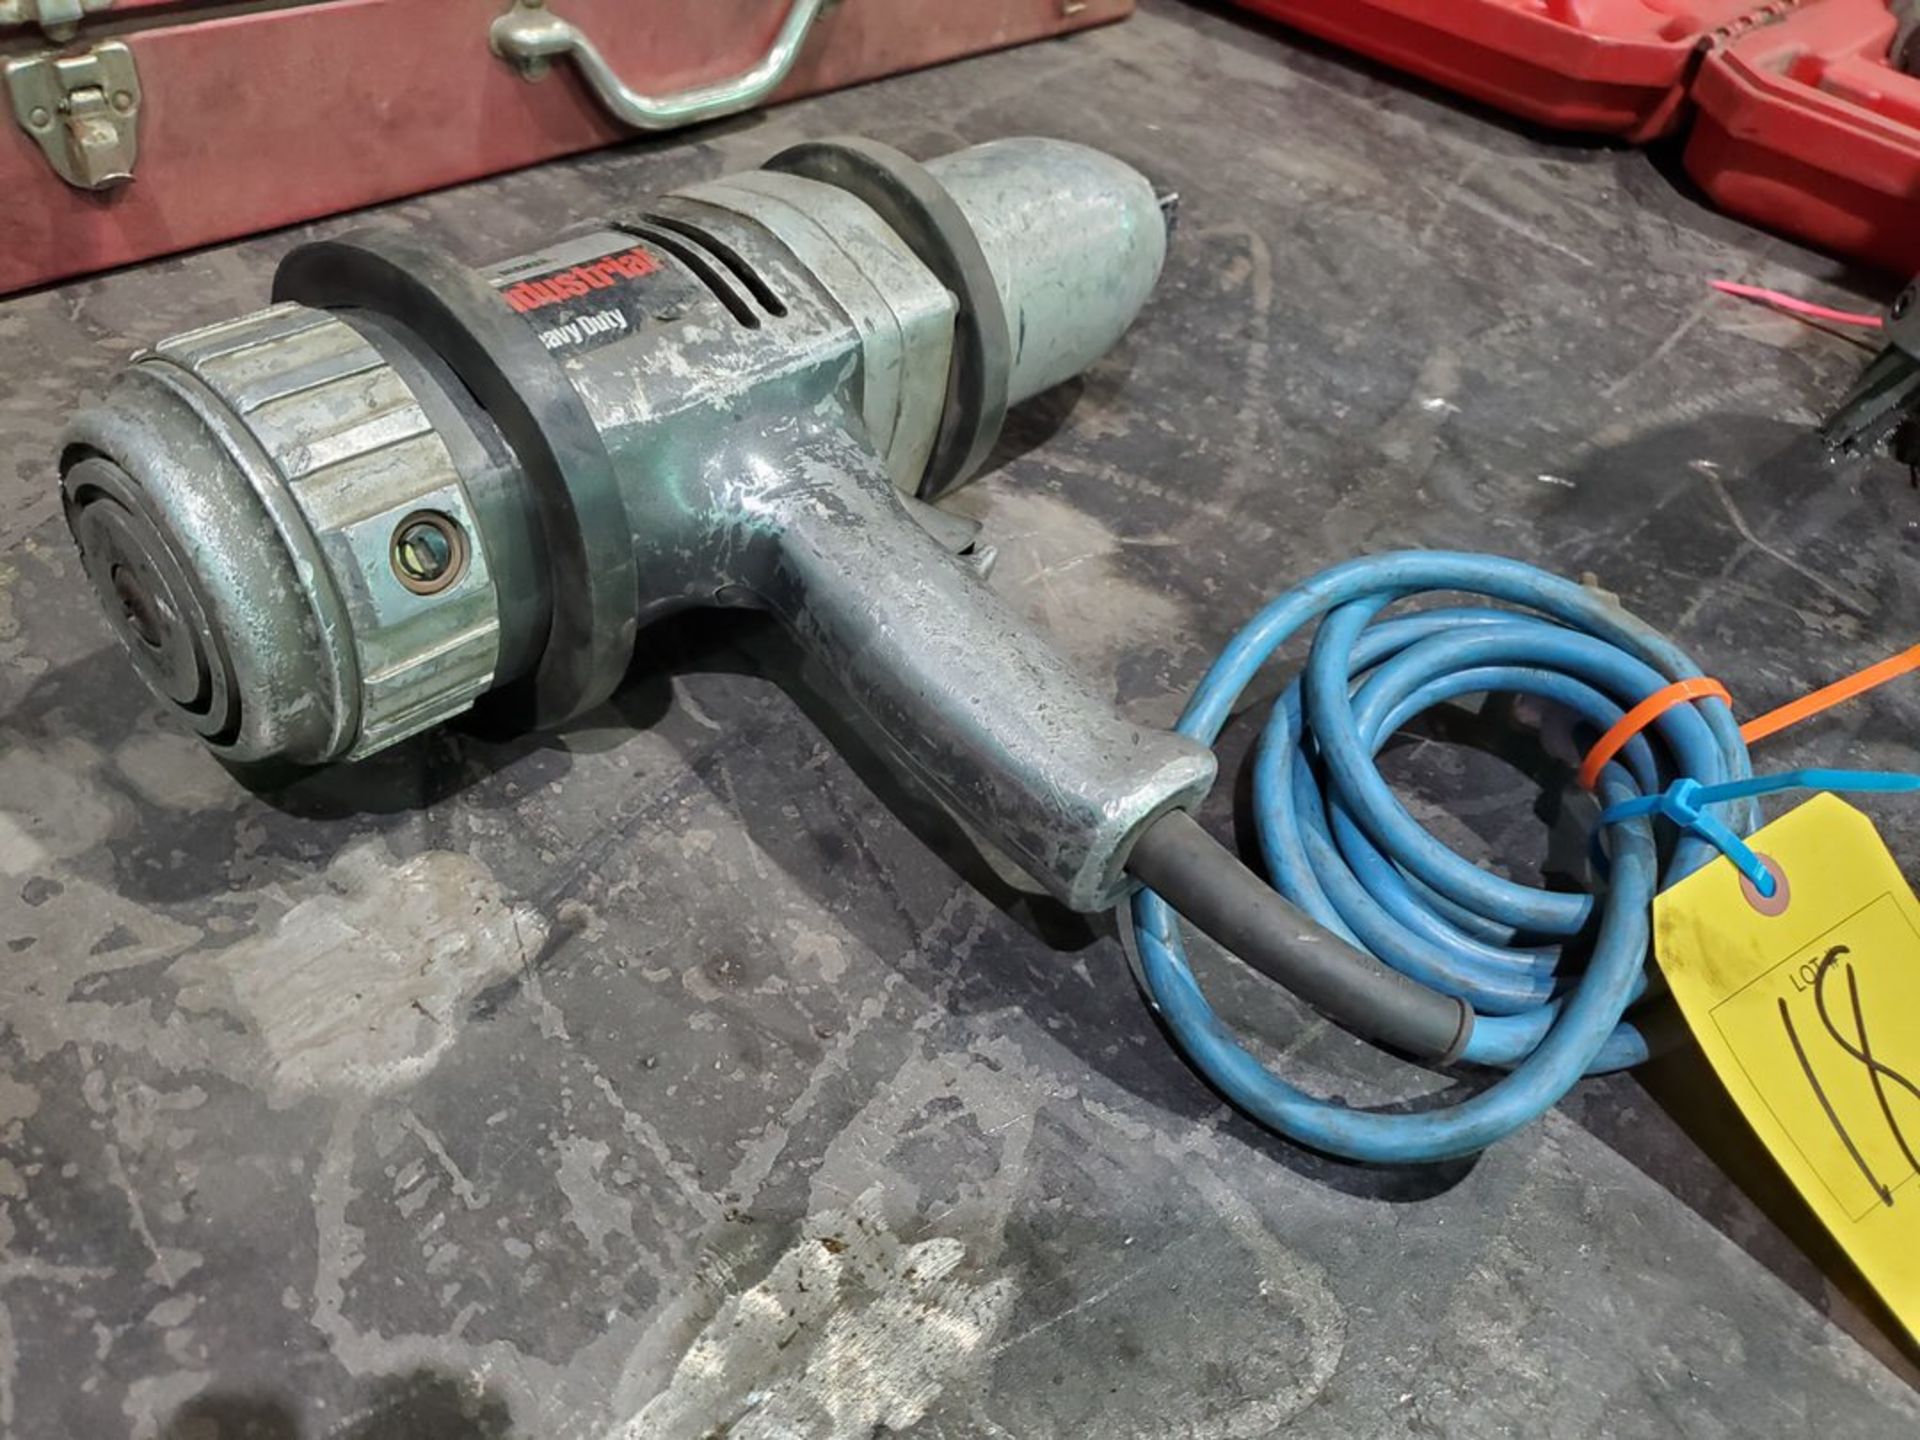 B&D 3/4" Impact Wrench 120V, 7.5A - Image 3 of 5